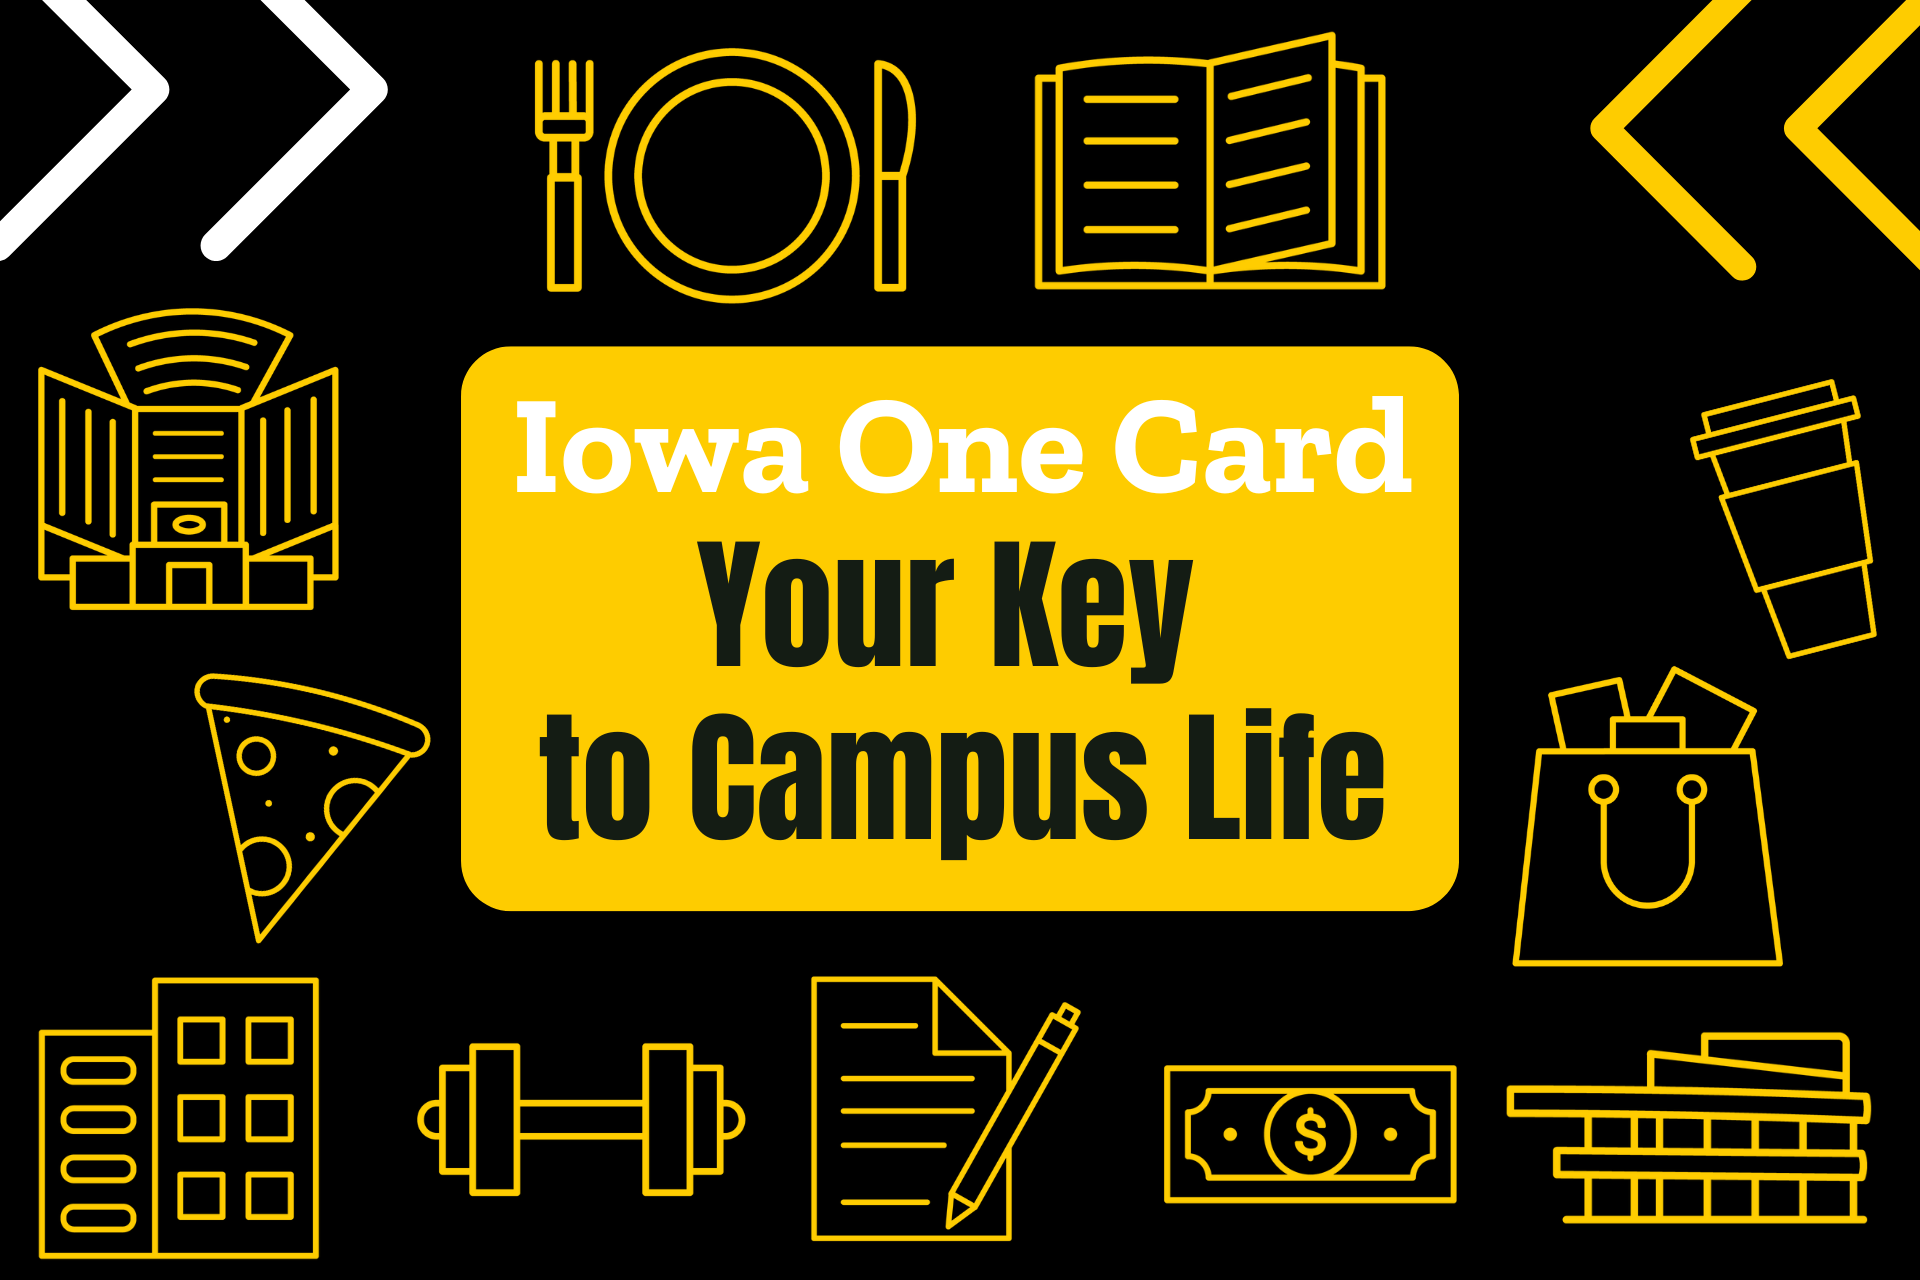 Iowa One Card Your Key to Campus Life